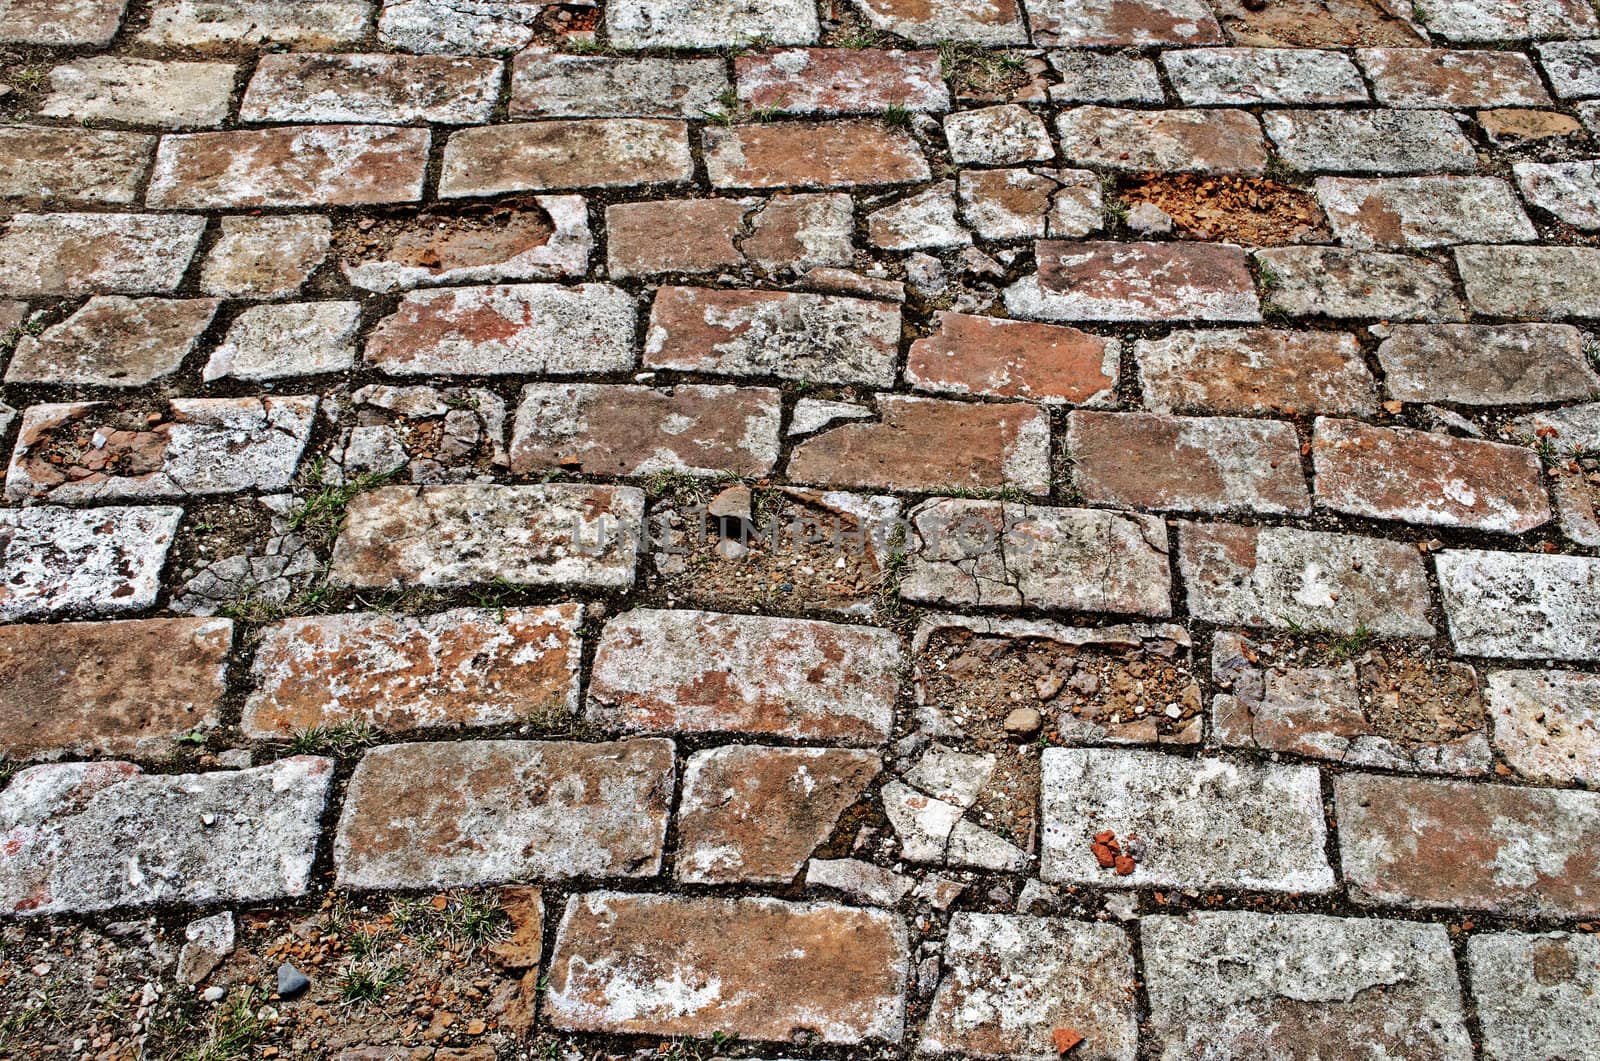 Weathered  brick pavement surface in ancient monastery